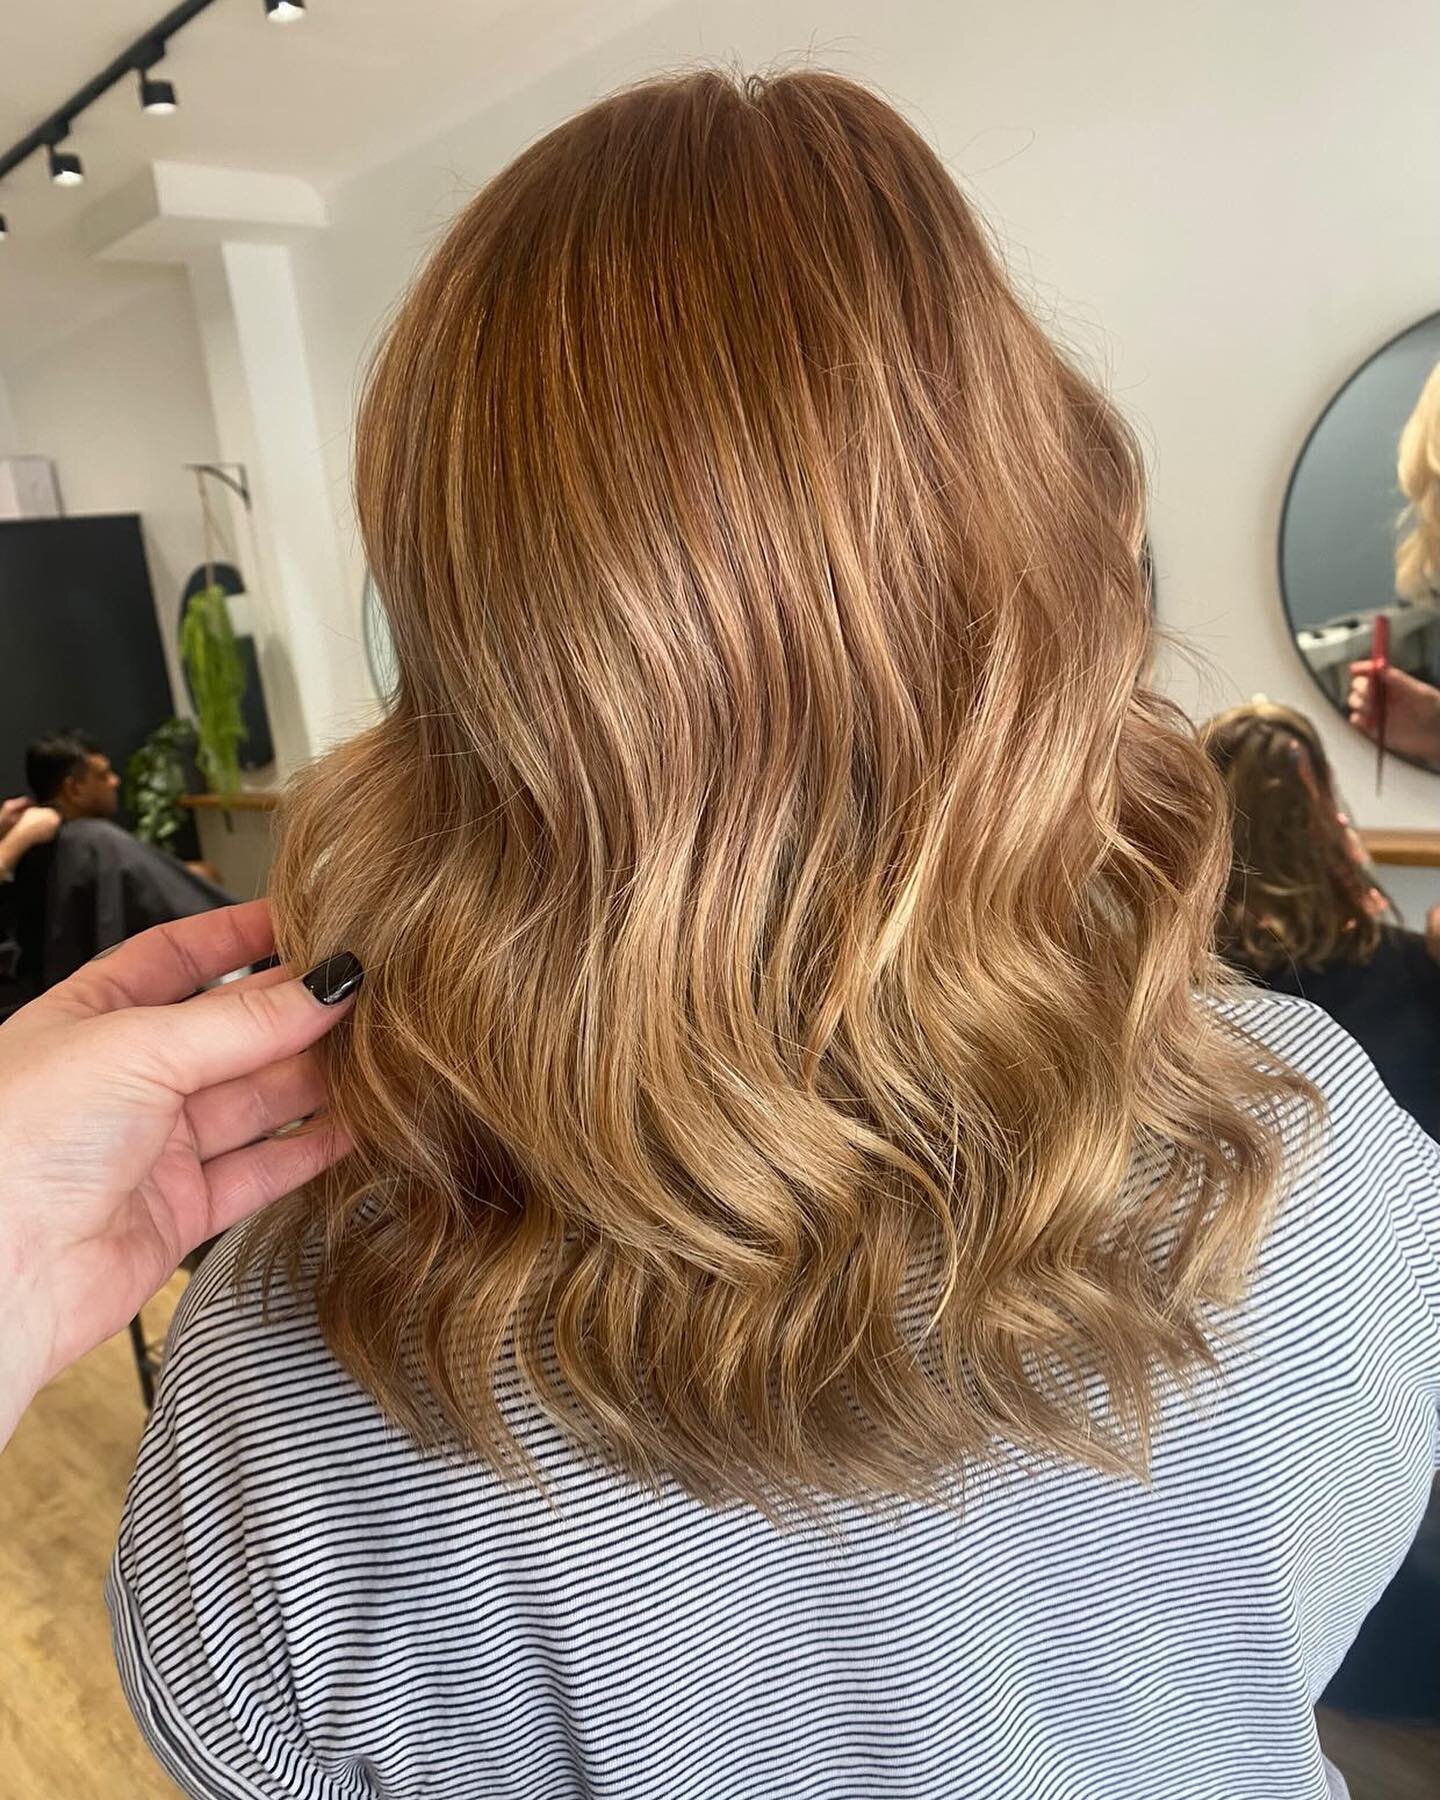 Gorgeous strawberry blonde by our very talented new colourist Keira @the.hair.hustler 🍓 🍓🍓#hairfieldssalon #kirraweesalon #strawberryblondehair